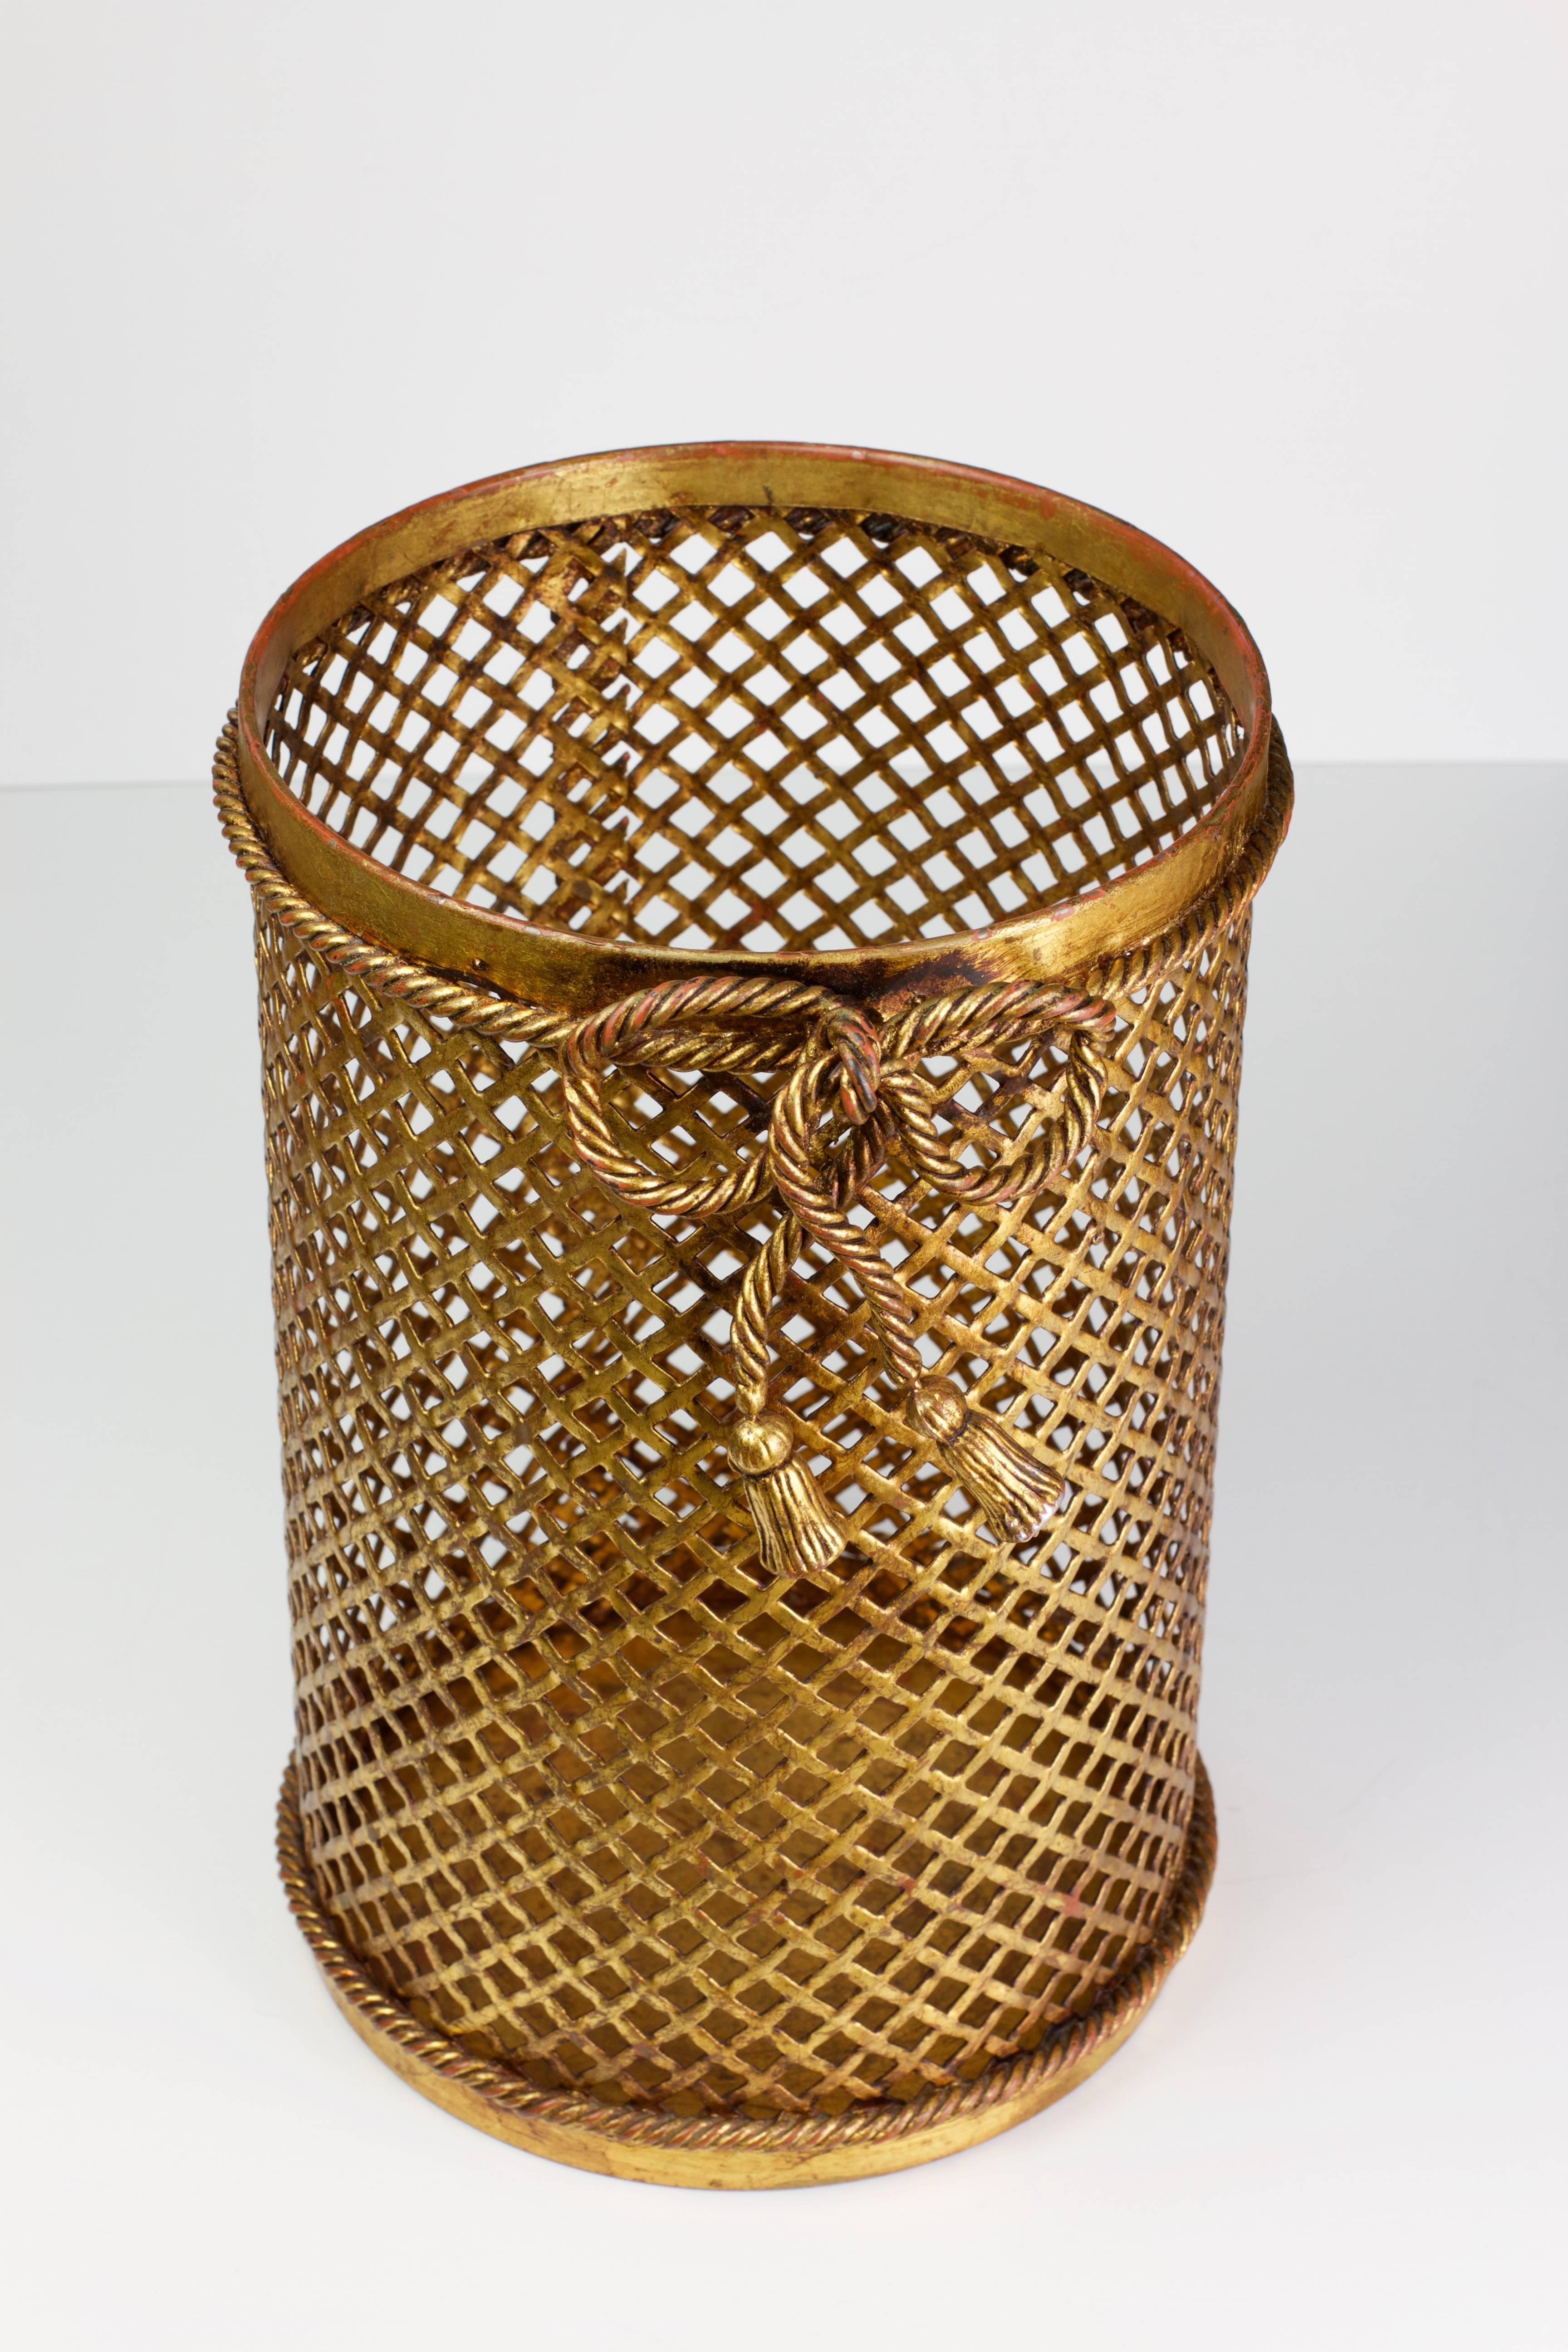 Wrought Iron Mid Century 1950s Hollywood Regency Italian Gold Gilded Waste Paper Basket 